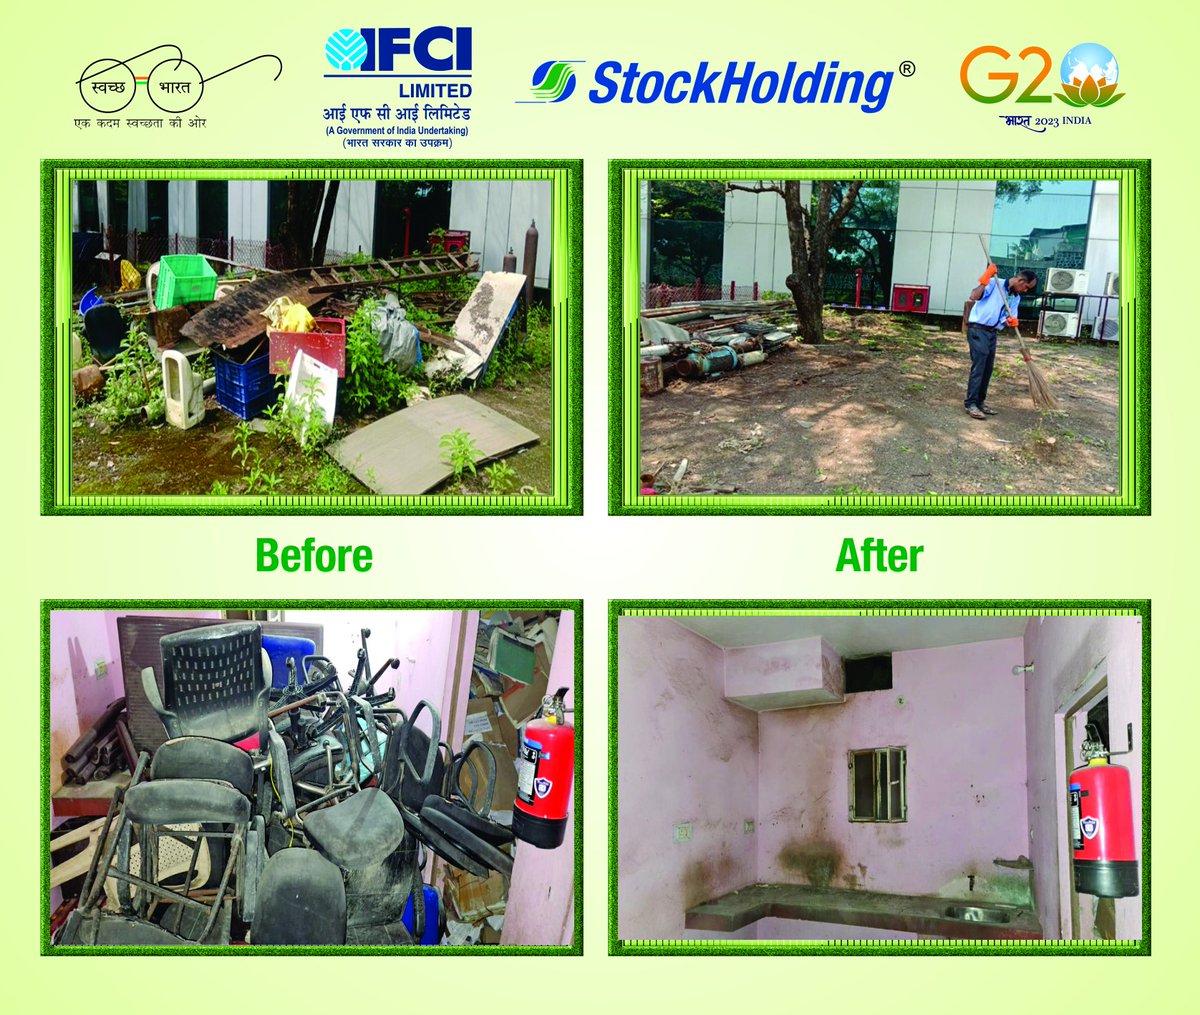 Under Special Campaign 3.0, IFCI’s subsidiary StockHolding’s participation in a cleanliness activity at Navi Mumbai Centre and a scrap disposal activity at Patna Branch Office #SwachhBharat #garbagefreeindia #shs2023 @DFS_India @SwachhBharatGov @swachhbharat @PMOIndia @DARPG_GoI